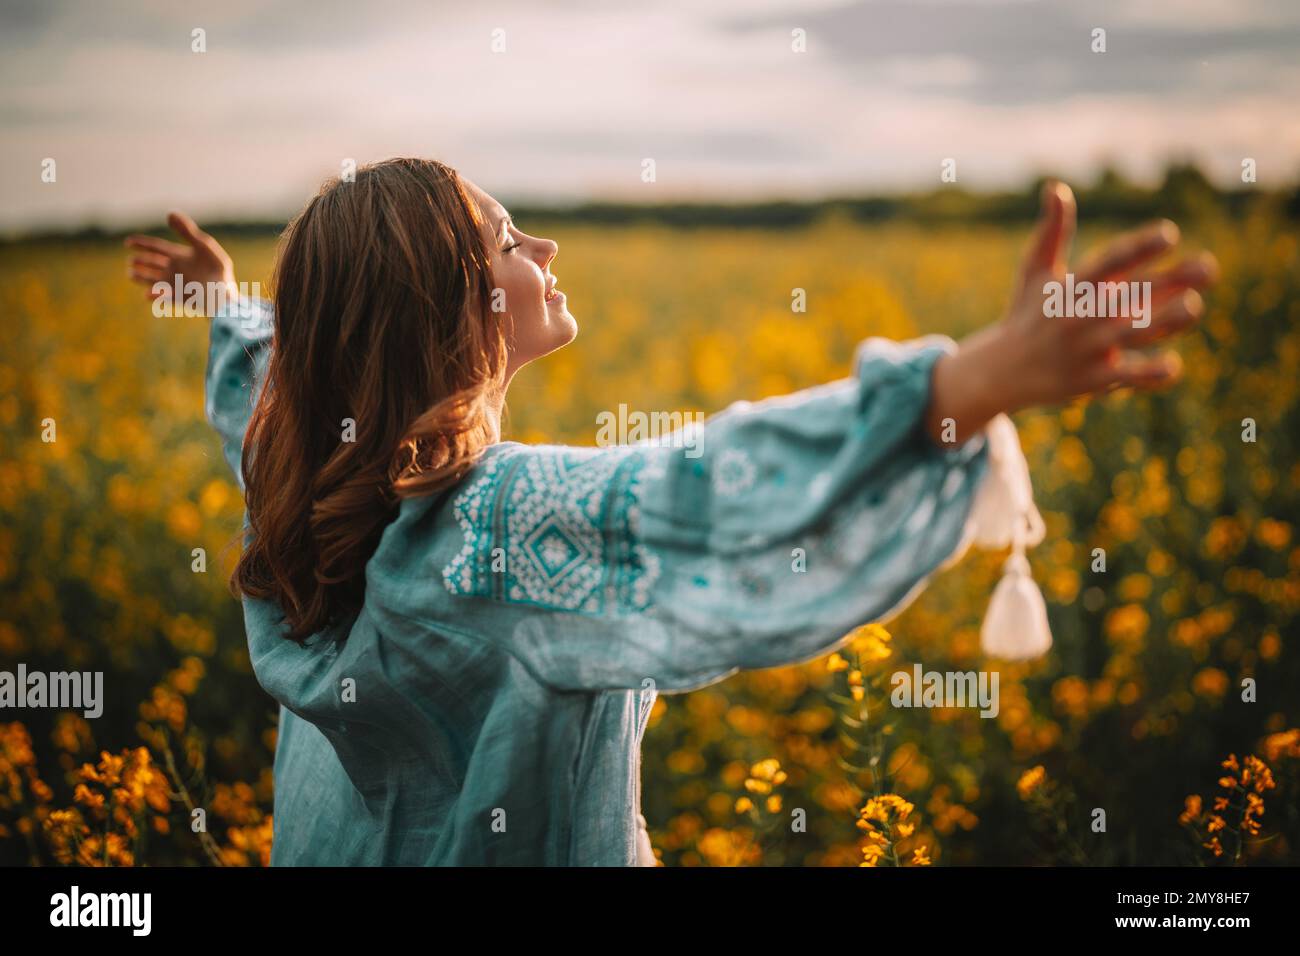 Smiling ukrainian woman standing in yellow canola field. Young lady in blue embroidery vyshyvanka blouse. Ukraine, independence, freedom, patriot symb Stock Photo